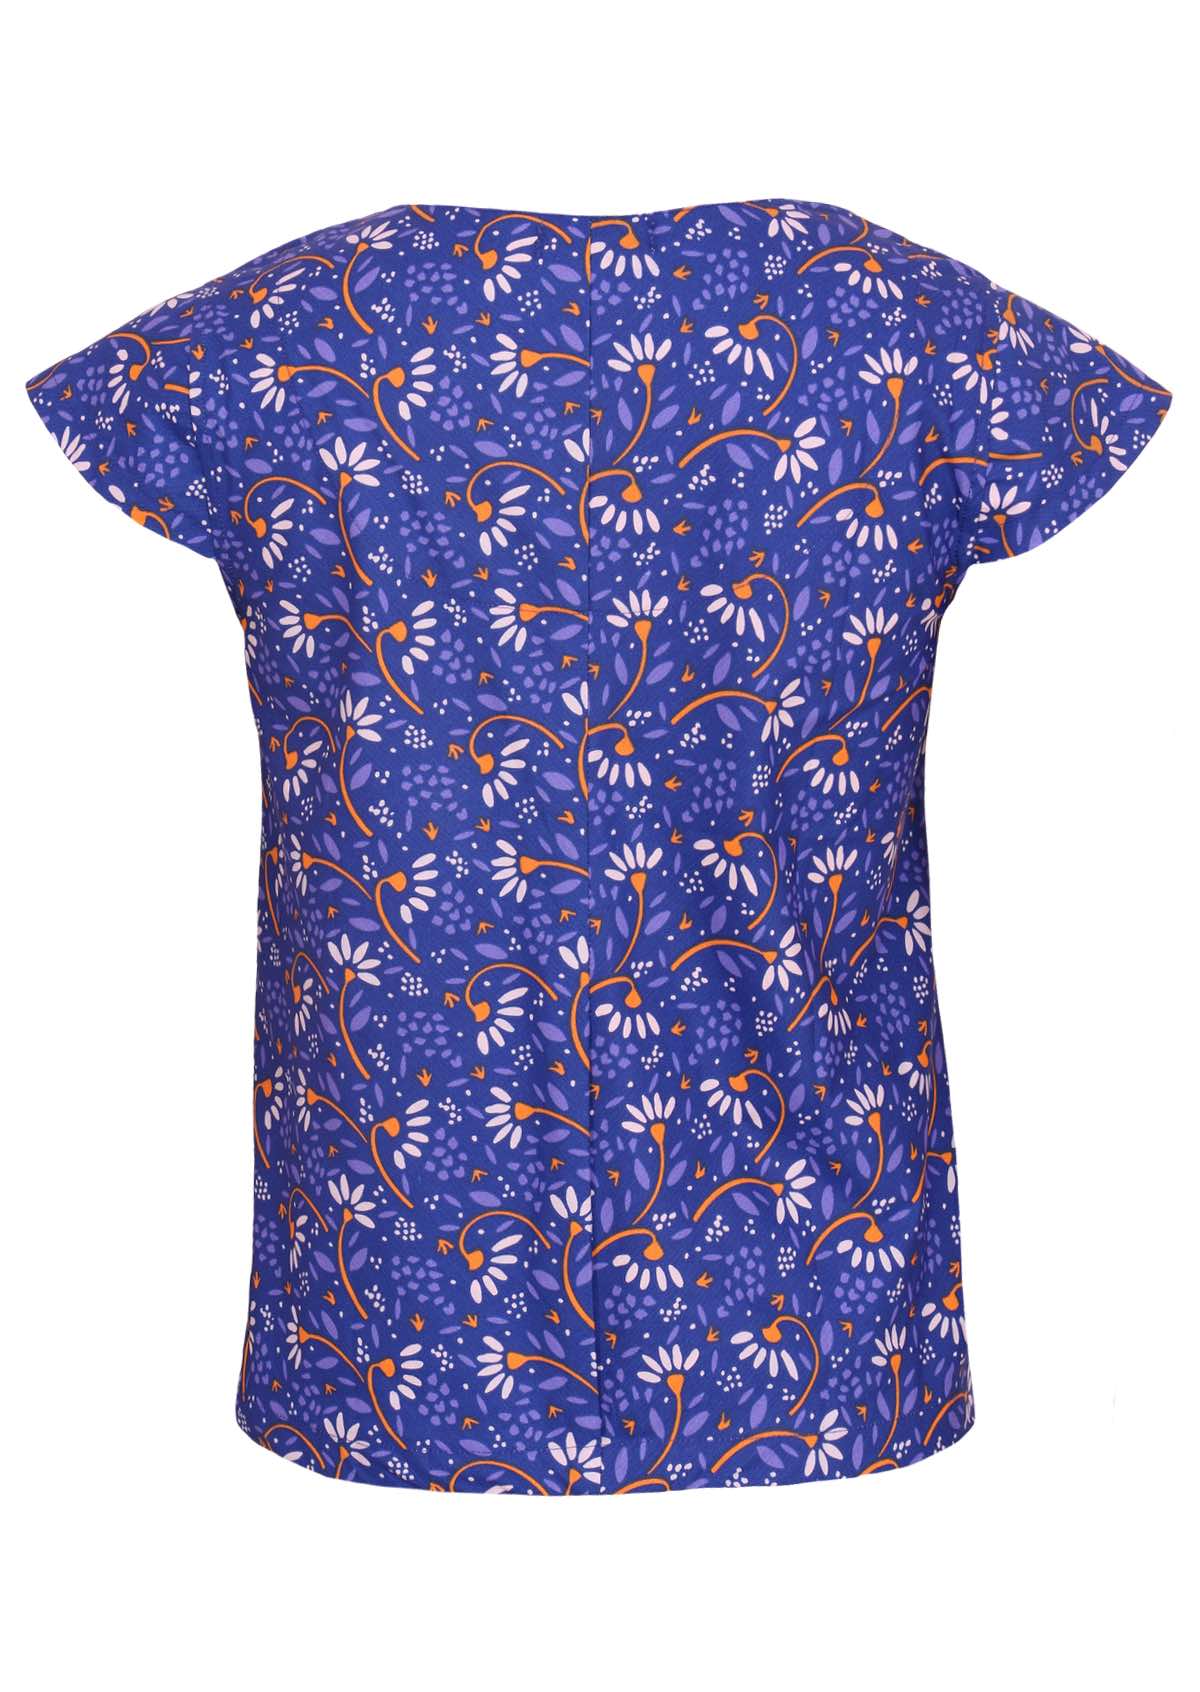 100% cotton blue based top is cut on a bias providing slight stretch. 